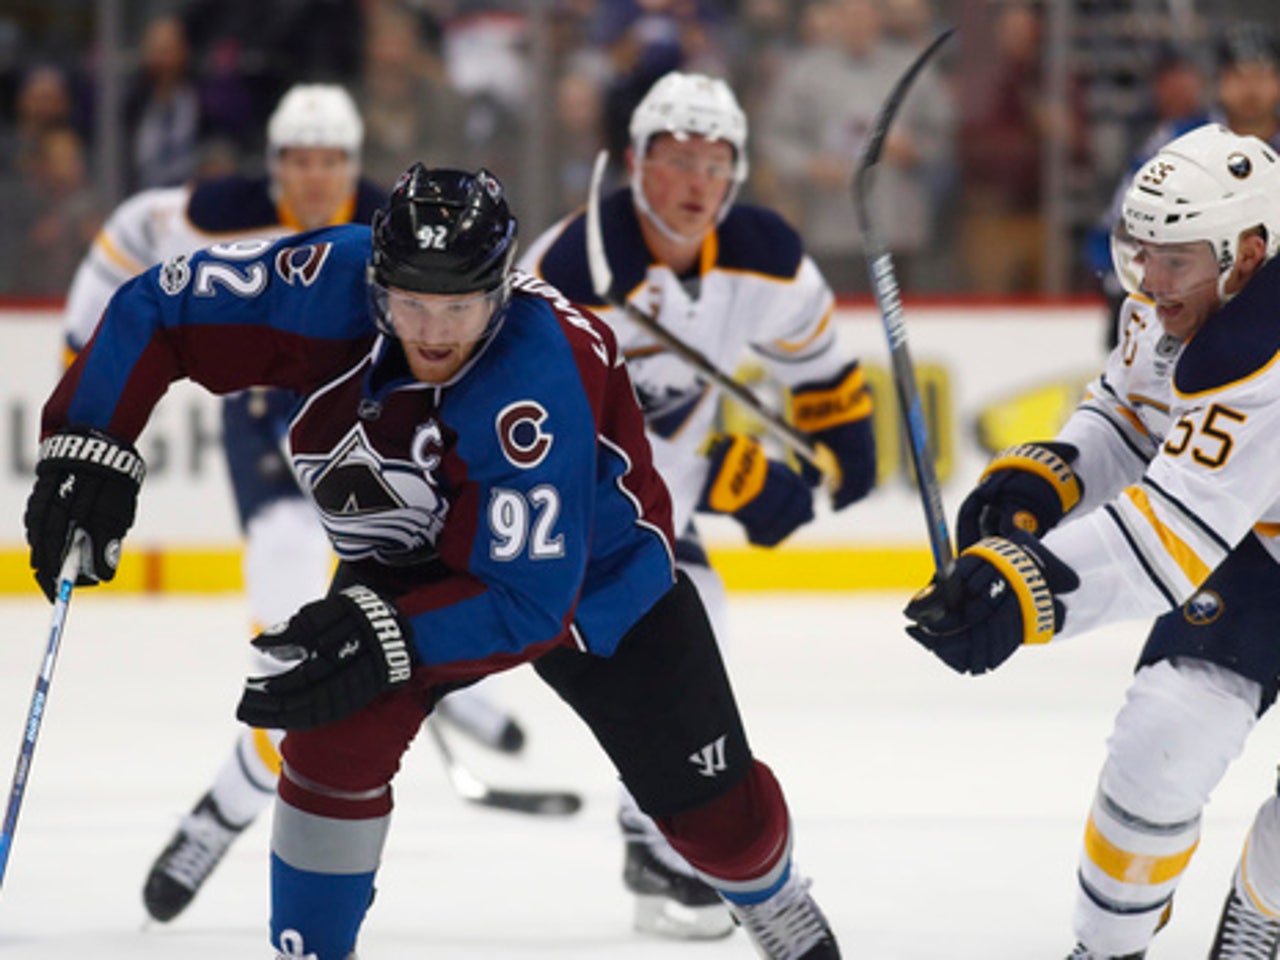 Jeremy Smith gets first NHL win as Avalanche beat Sabres 5-3